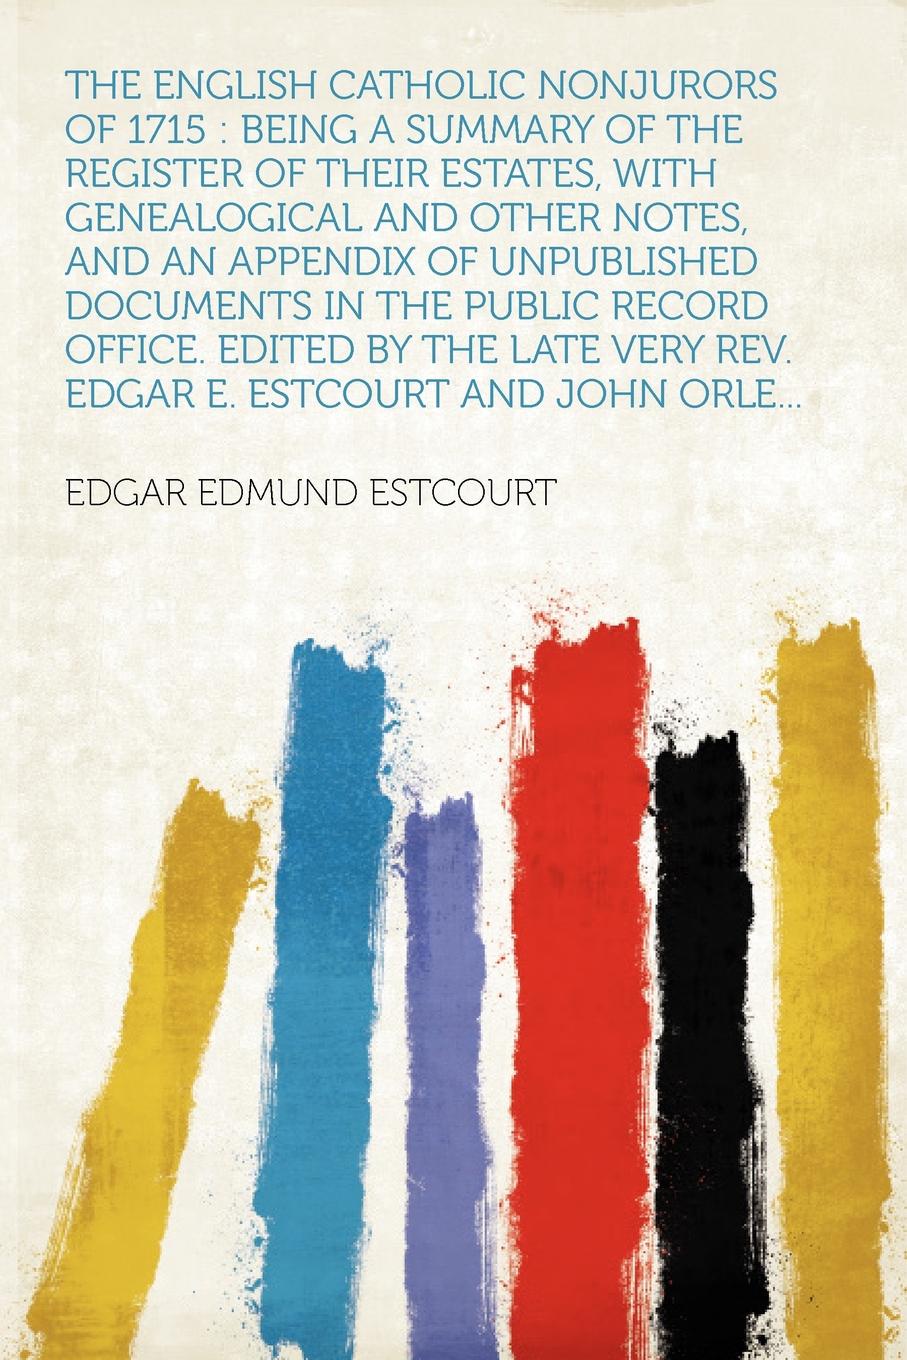 The English Catholic Nonjurors of 1715. Being a Summary of the Register of Their Estates, With Genealogical and Other Notes, and an Appendix of Unpublished Documents in the Public Record Office. Edited by the Late Very Rev. Edgar E. Estcourt and J...